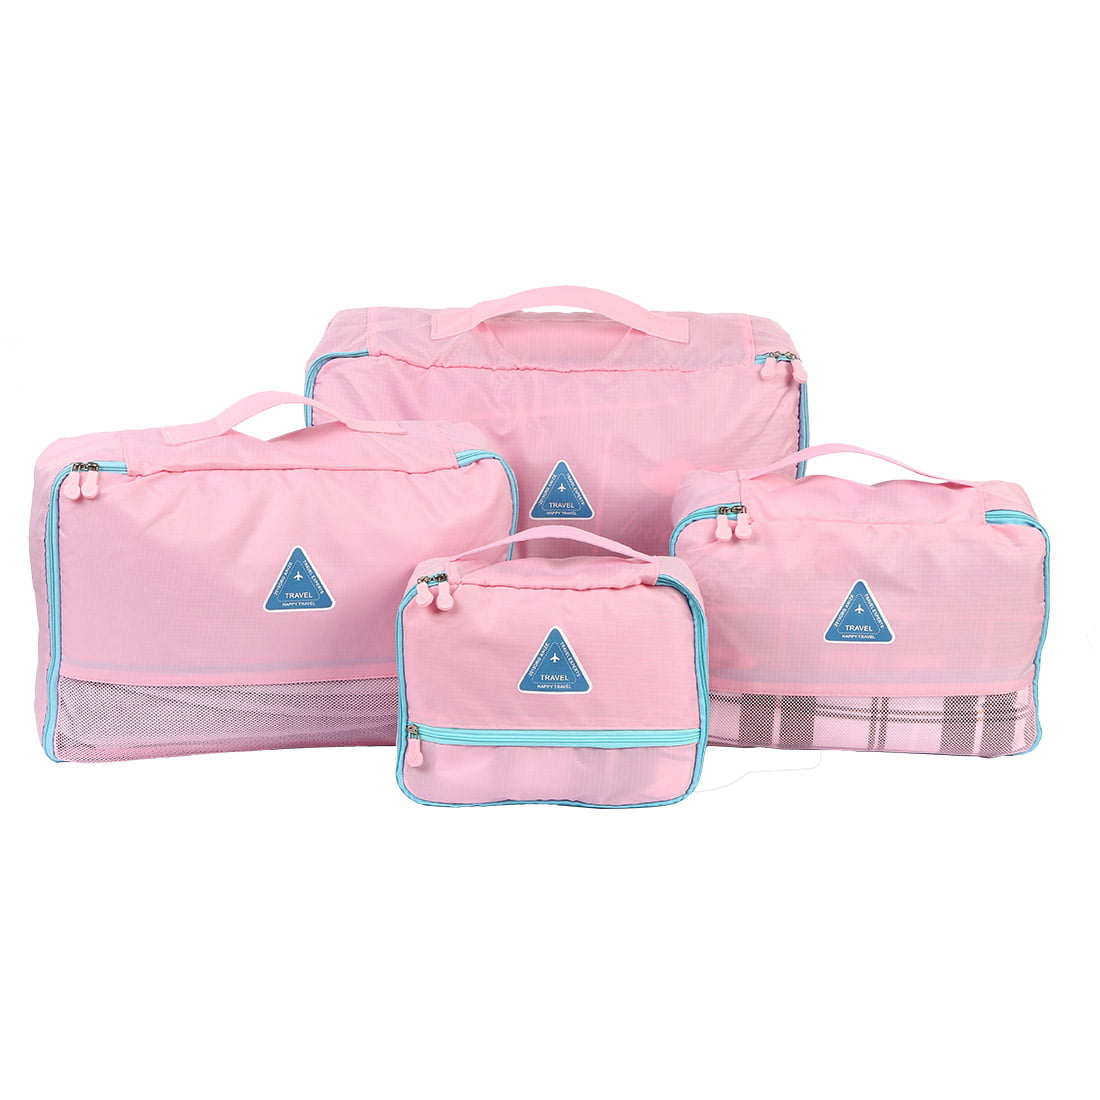 4pcs Travel Packing Cubes Clothes Storage Bags Suitcase Luggage Organizer Pouch Pink | Walmart ...